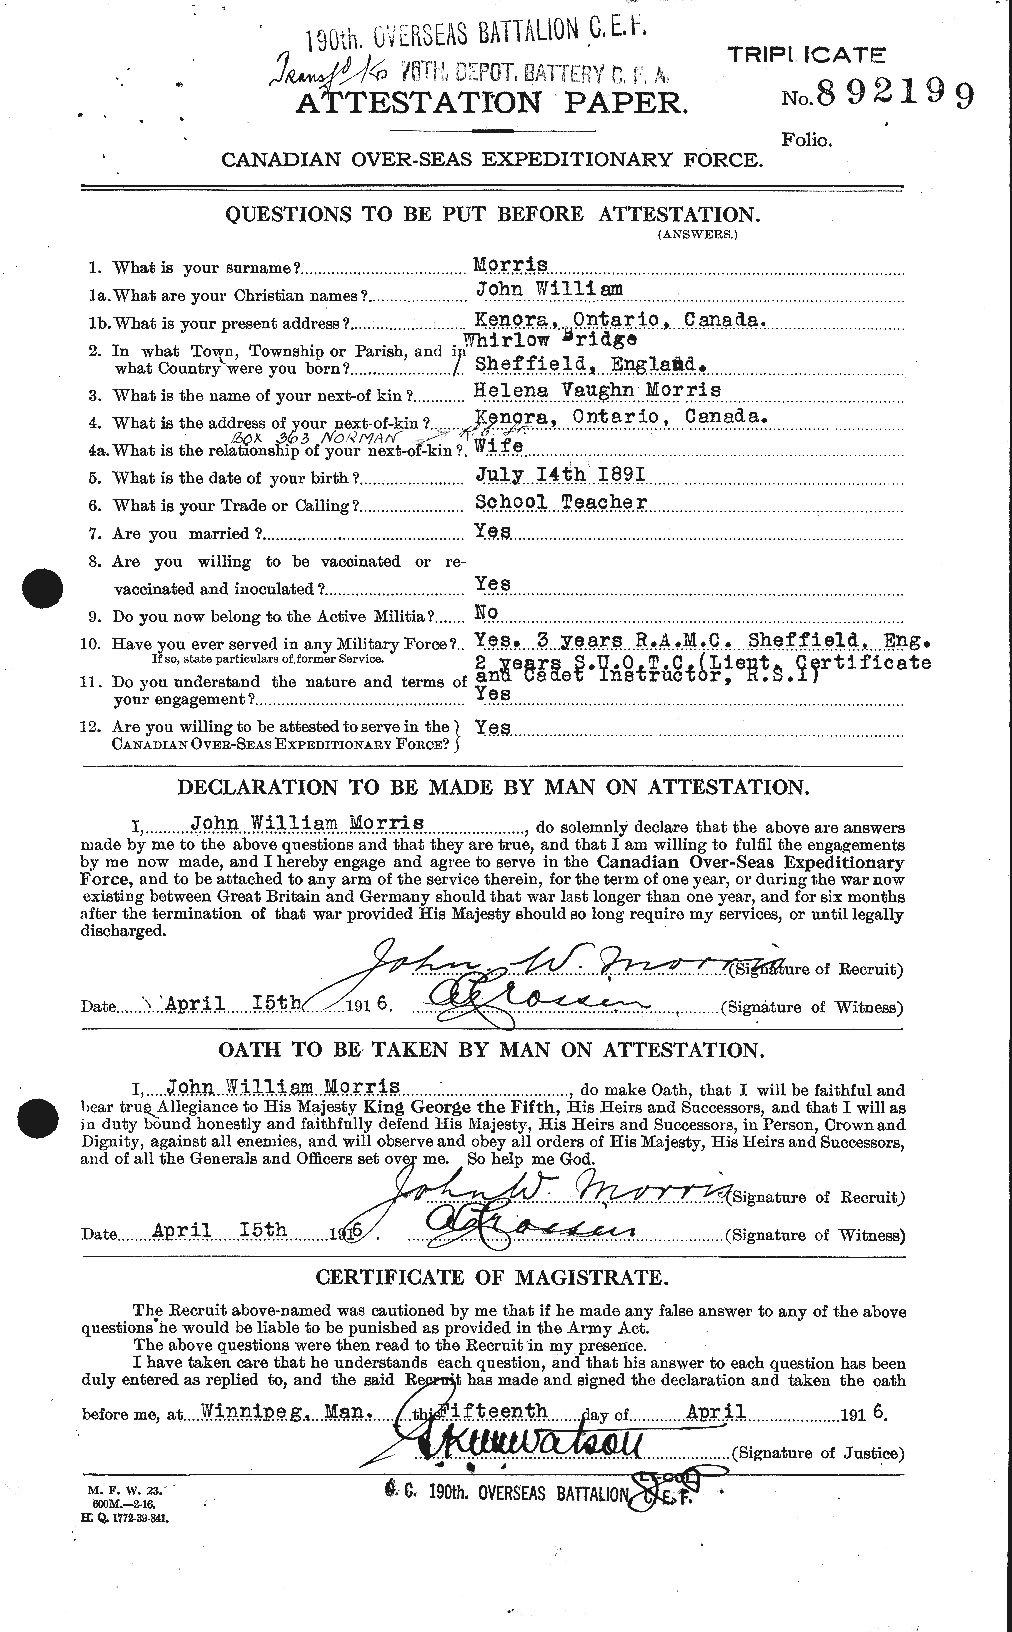 Personnel Records of the First World War - CEF 508544a